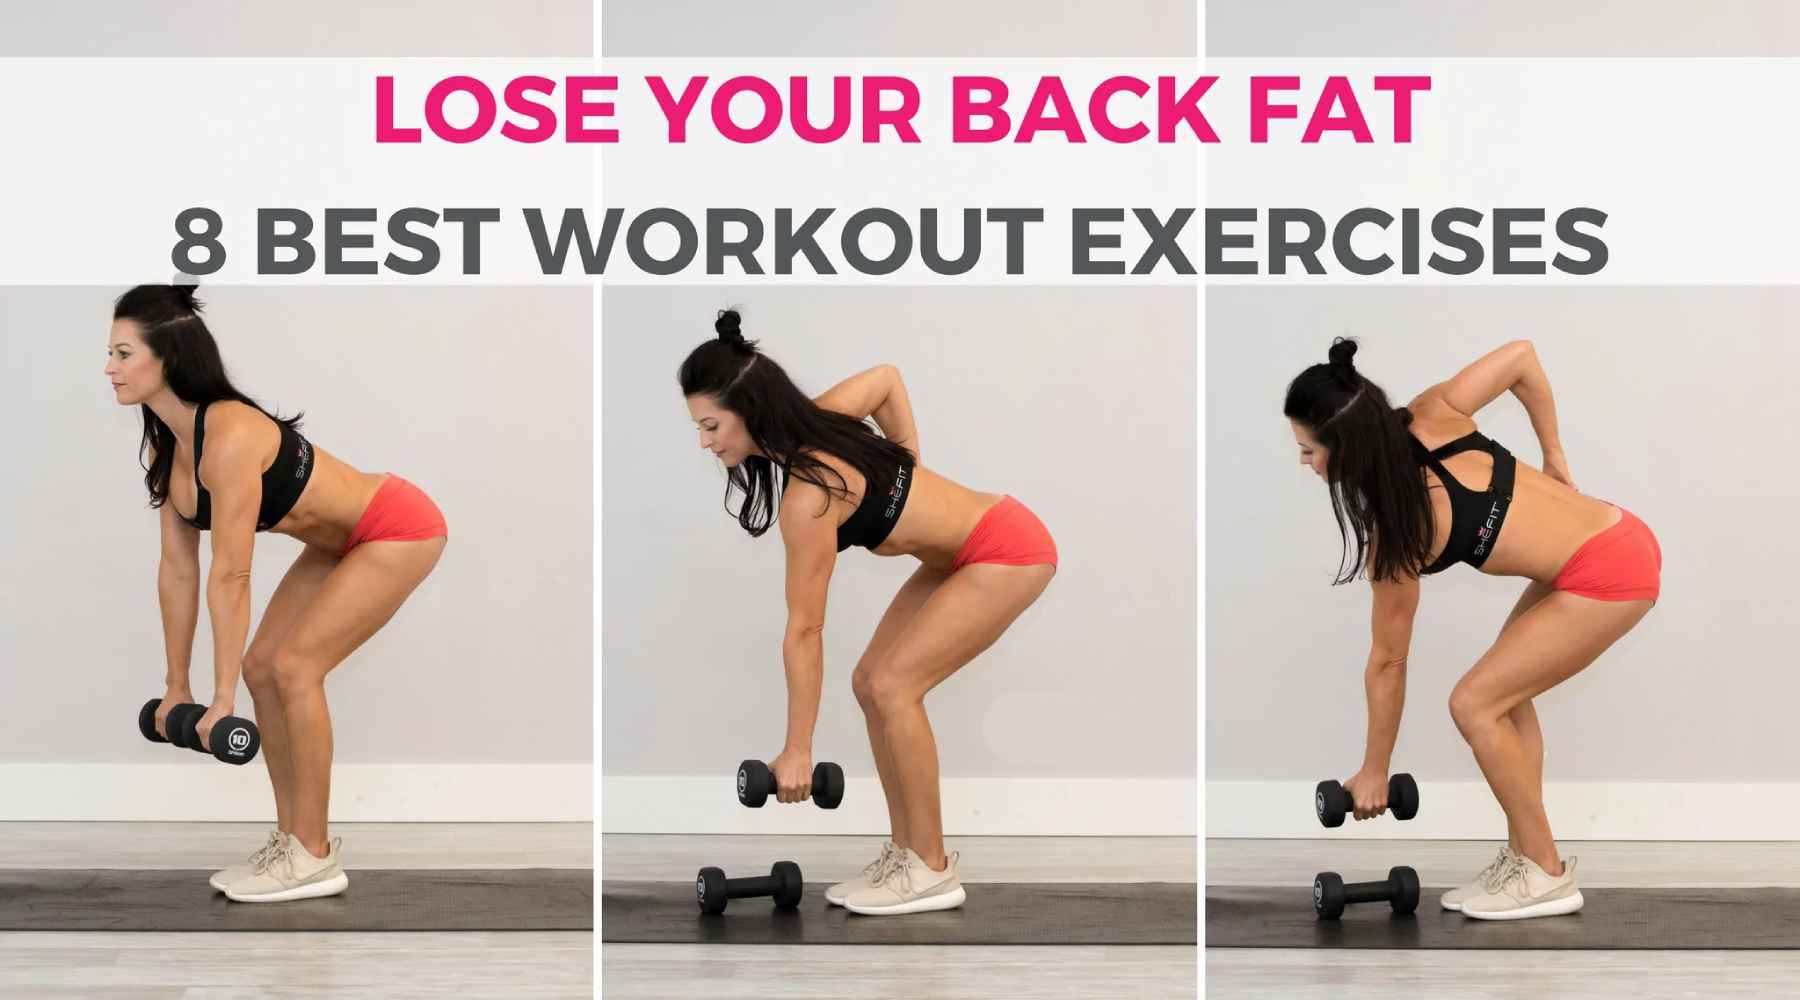 8 Awesome At Home Back Workouts with Weights for Women : The 8 back exercises below are designed to target your upper and lower back muscles, helping you get that toned look you’re after.